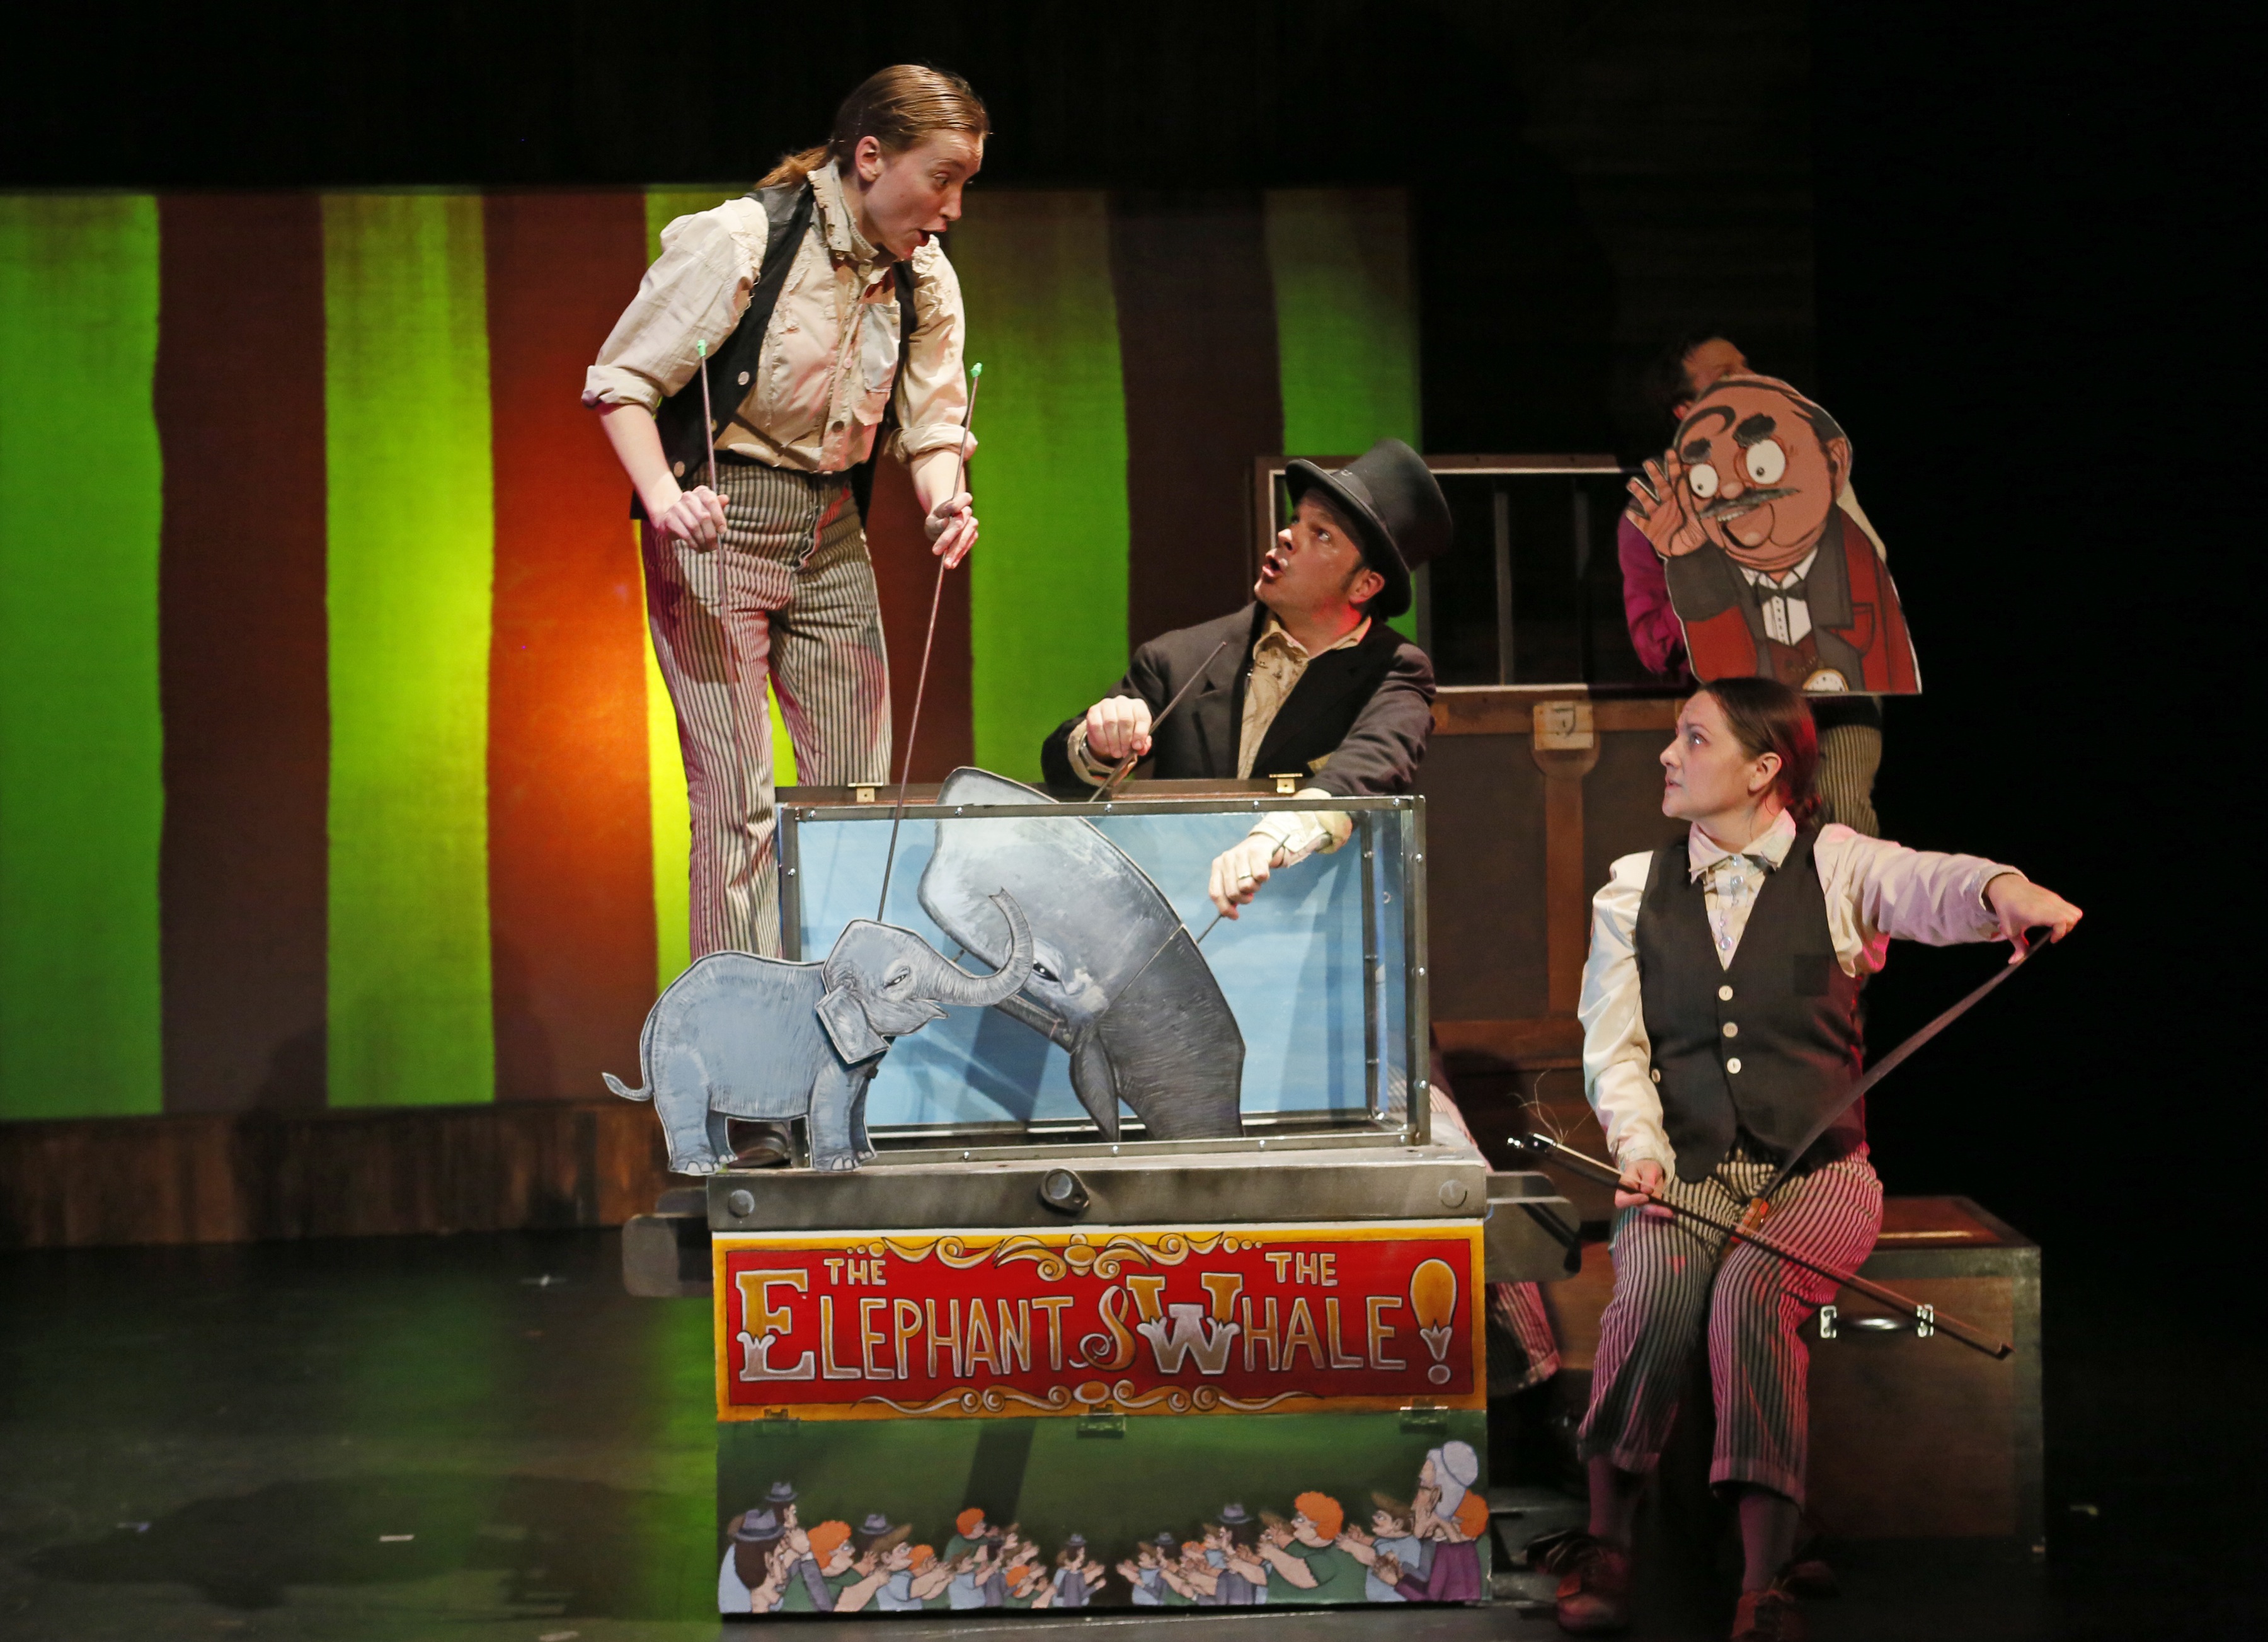 The Chicago Children's Theater presents a dress rehearsal for The Elephant and the Whale Tuesday April 8, 2013, at the Ruth Page Theatre,, 1020 N. Dearborn.